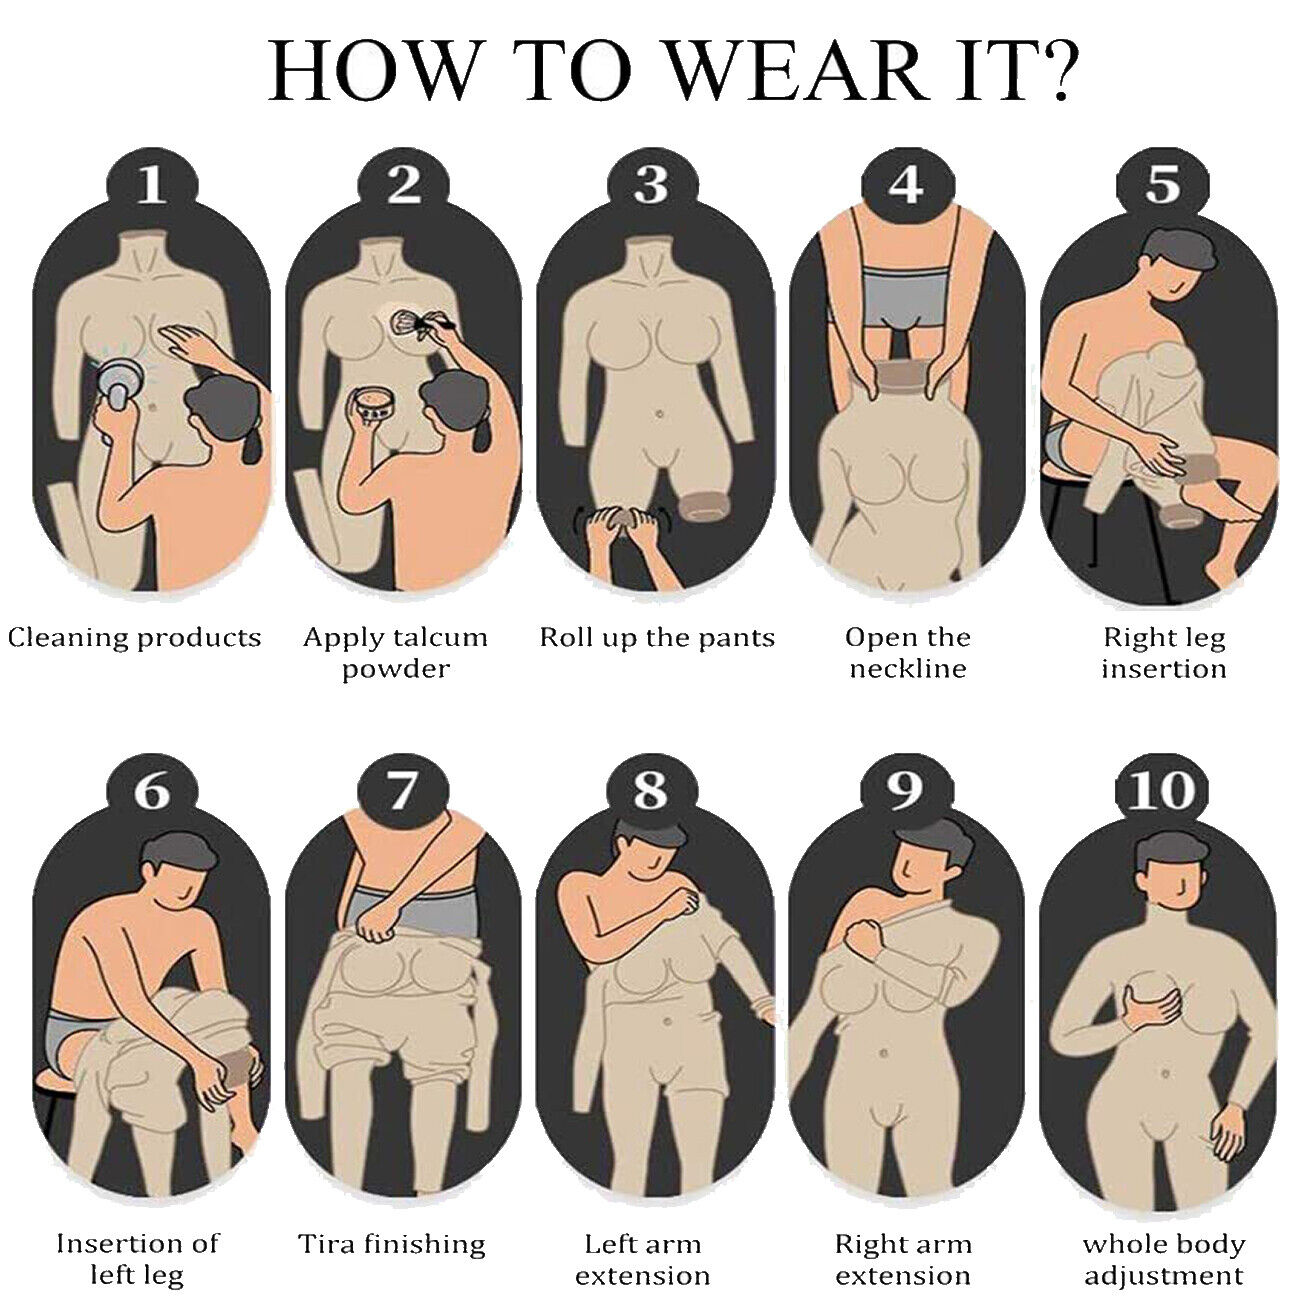 How to wear?